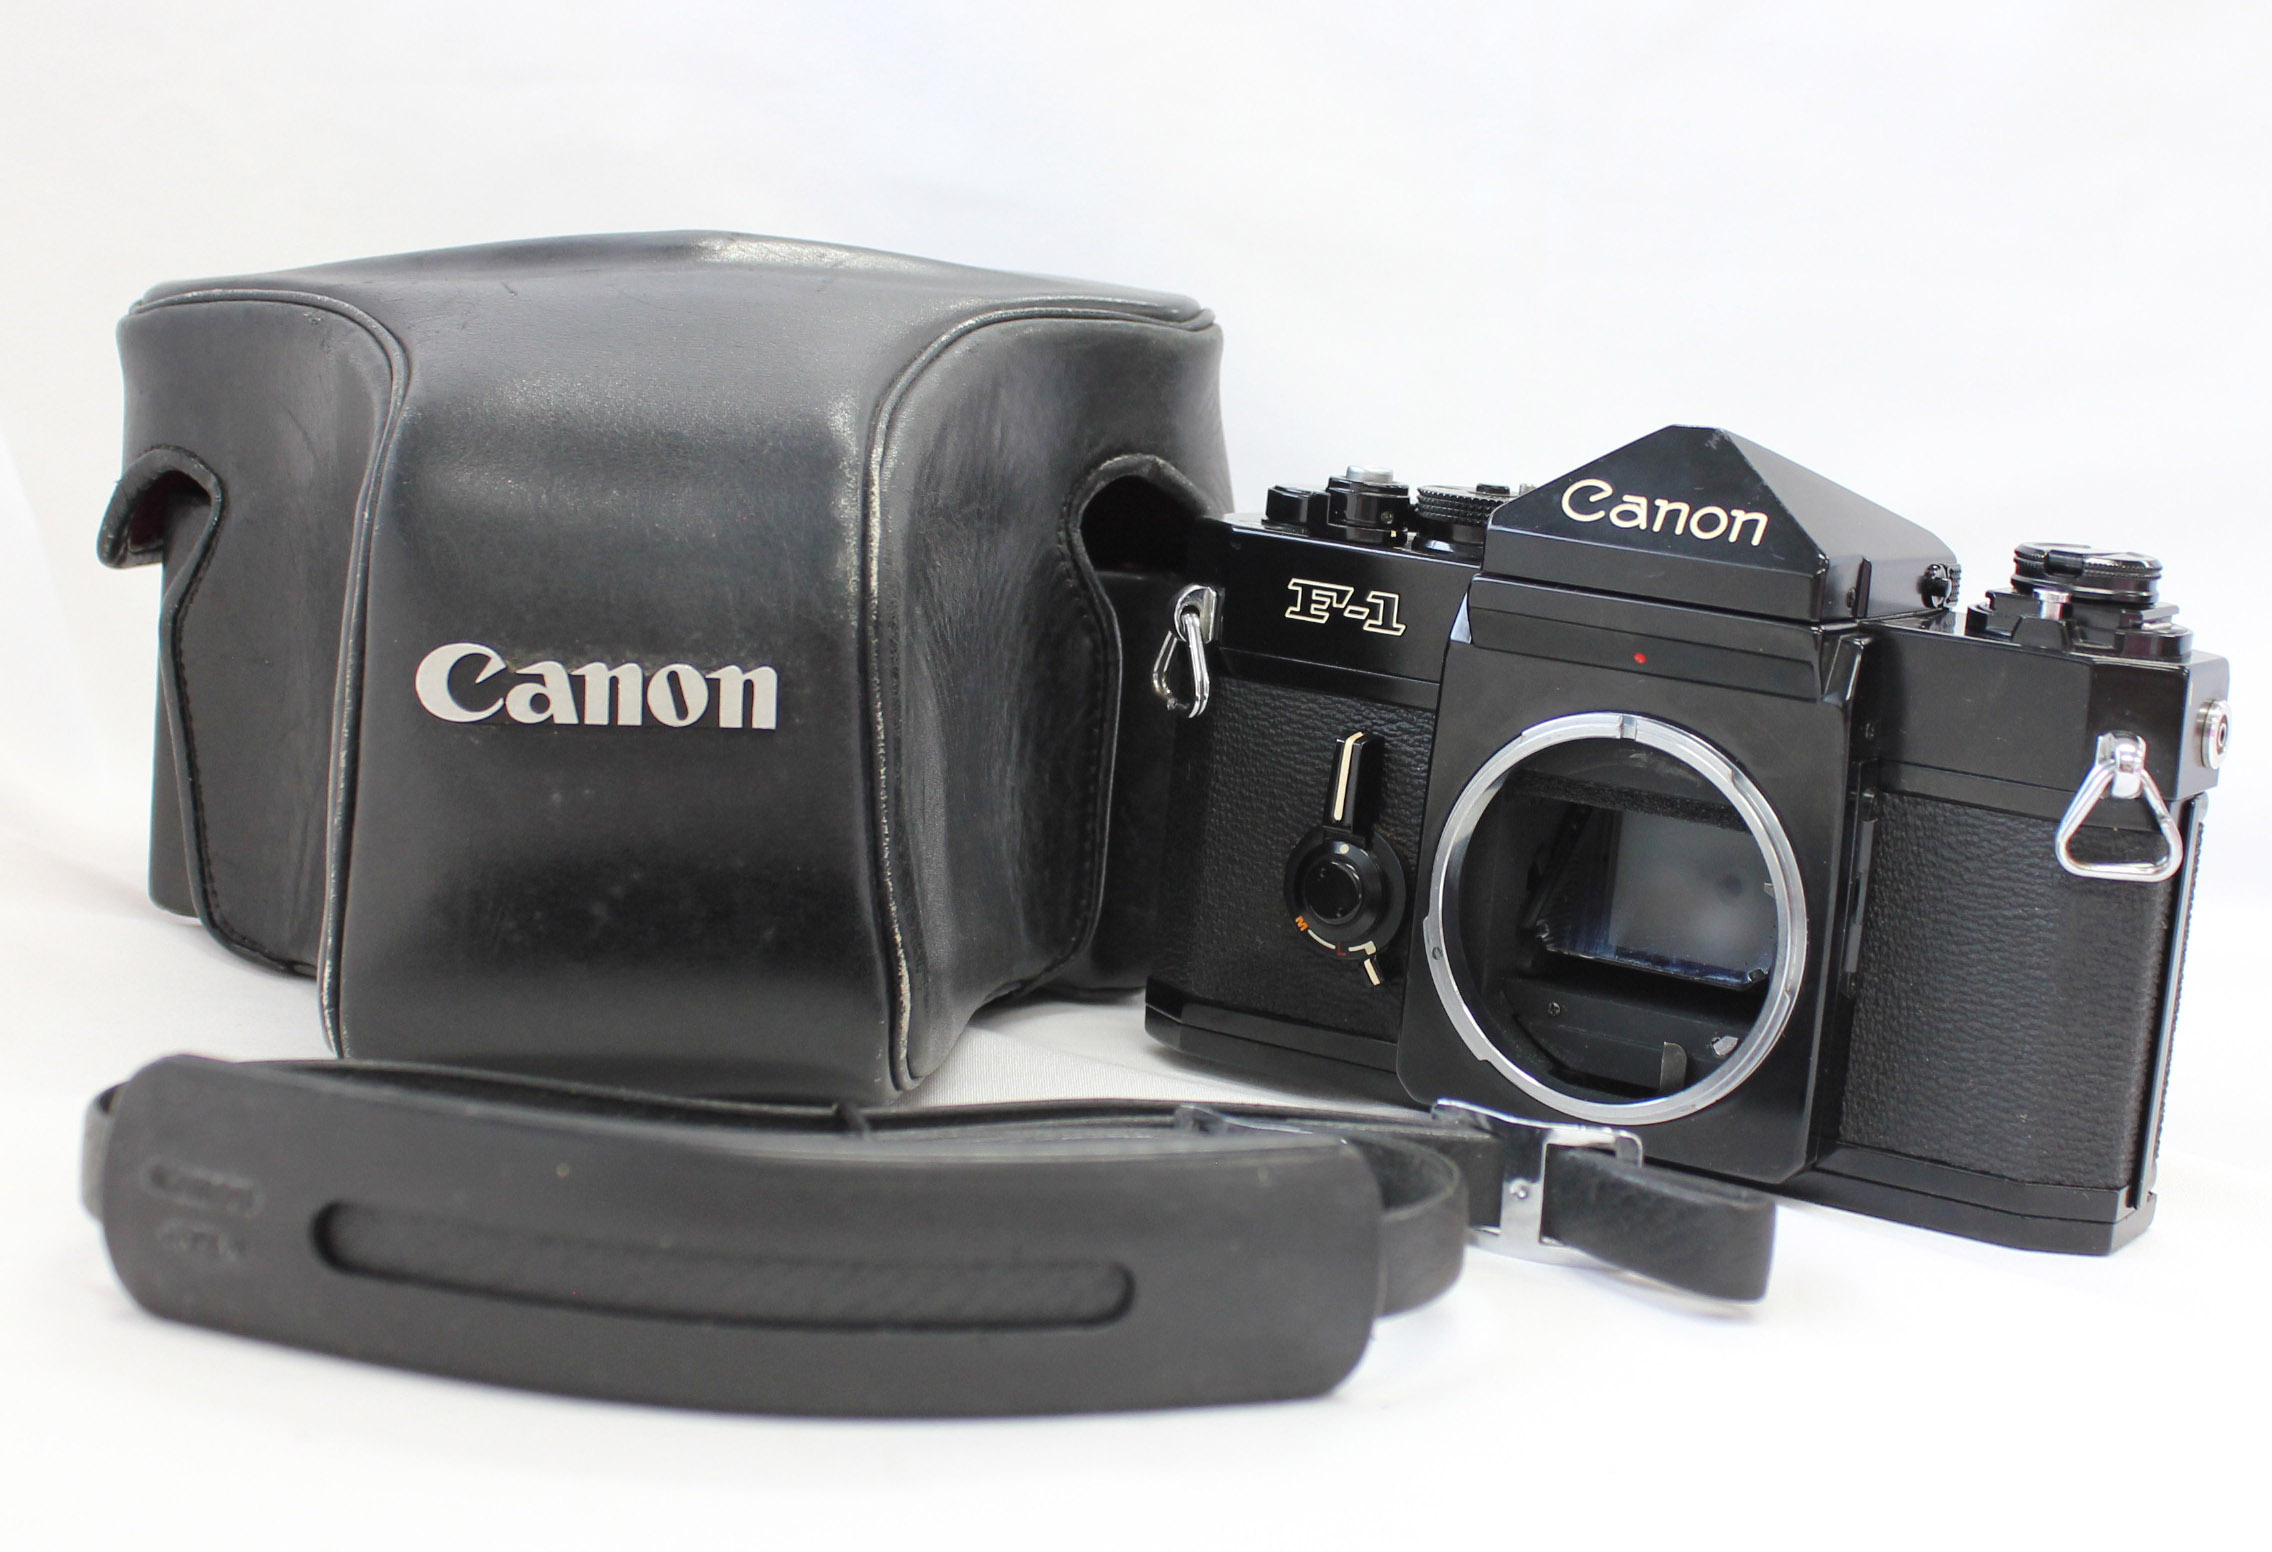  Canon F-1 35mm SLR Film Camera Body with Case and Strap from Japan Photo 0